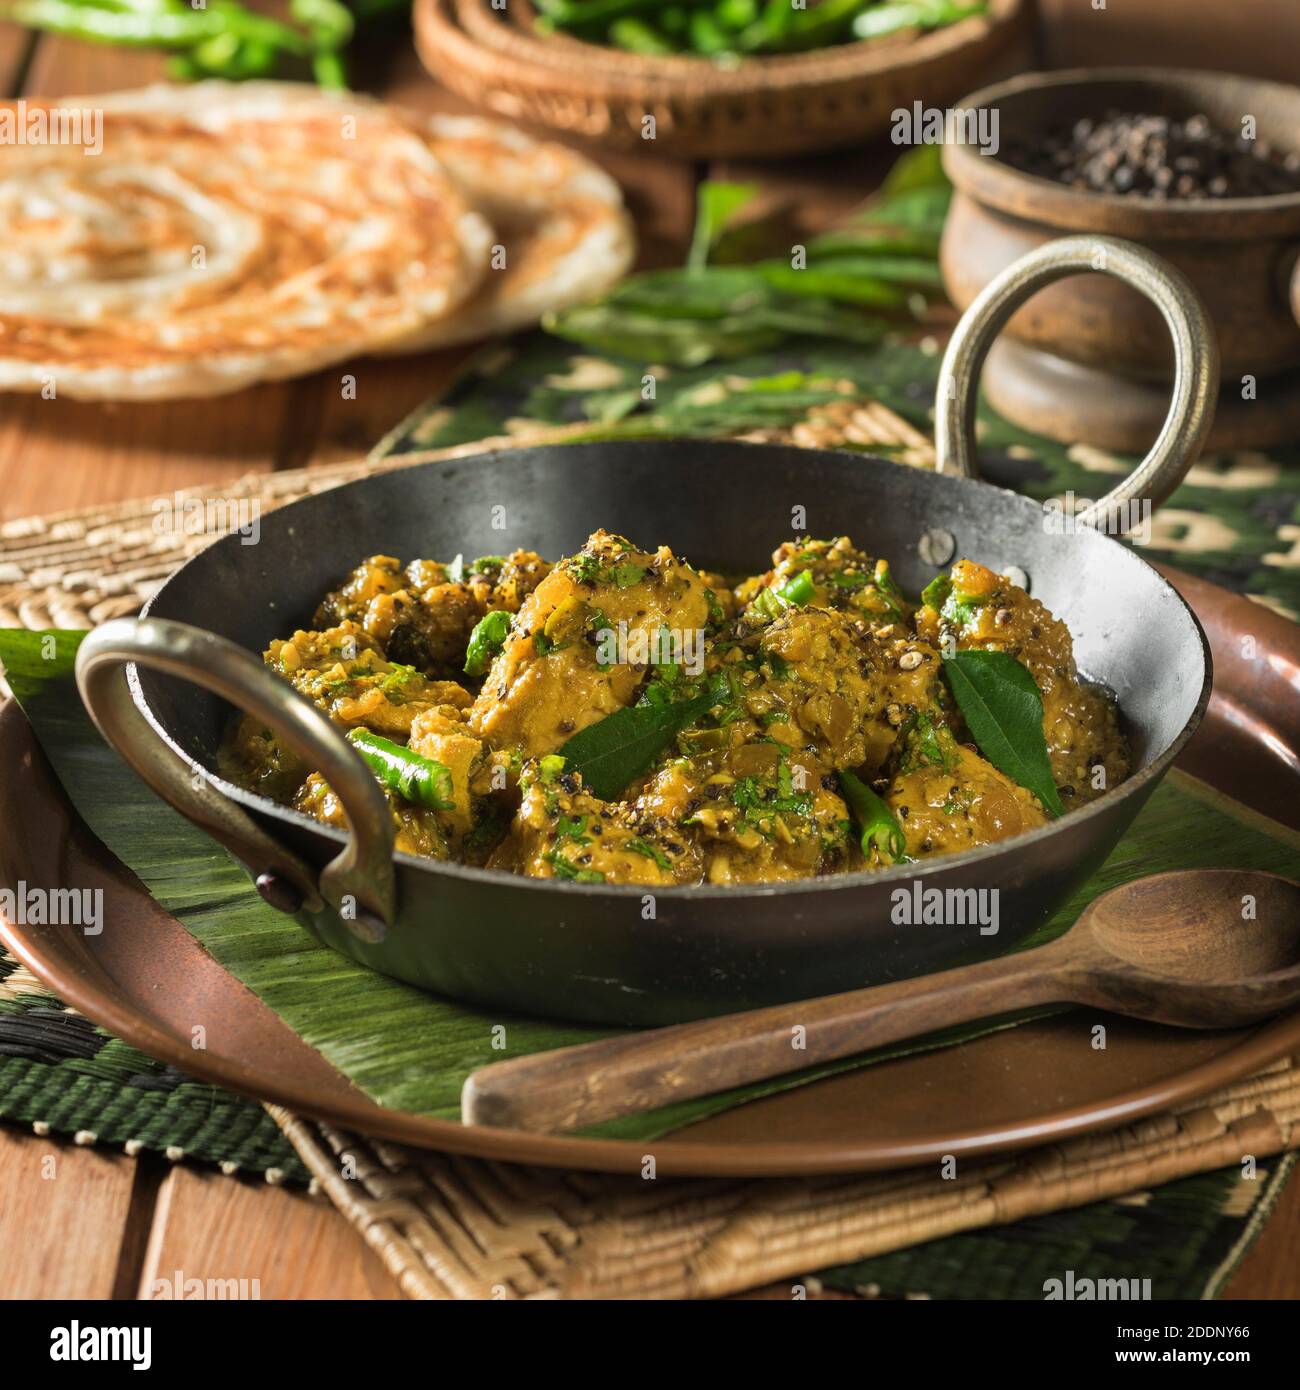 Andhra pepper chicken. South India Food Stock Photo